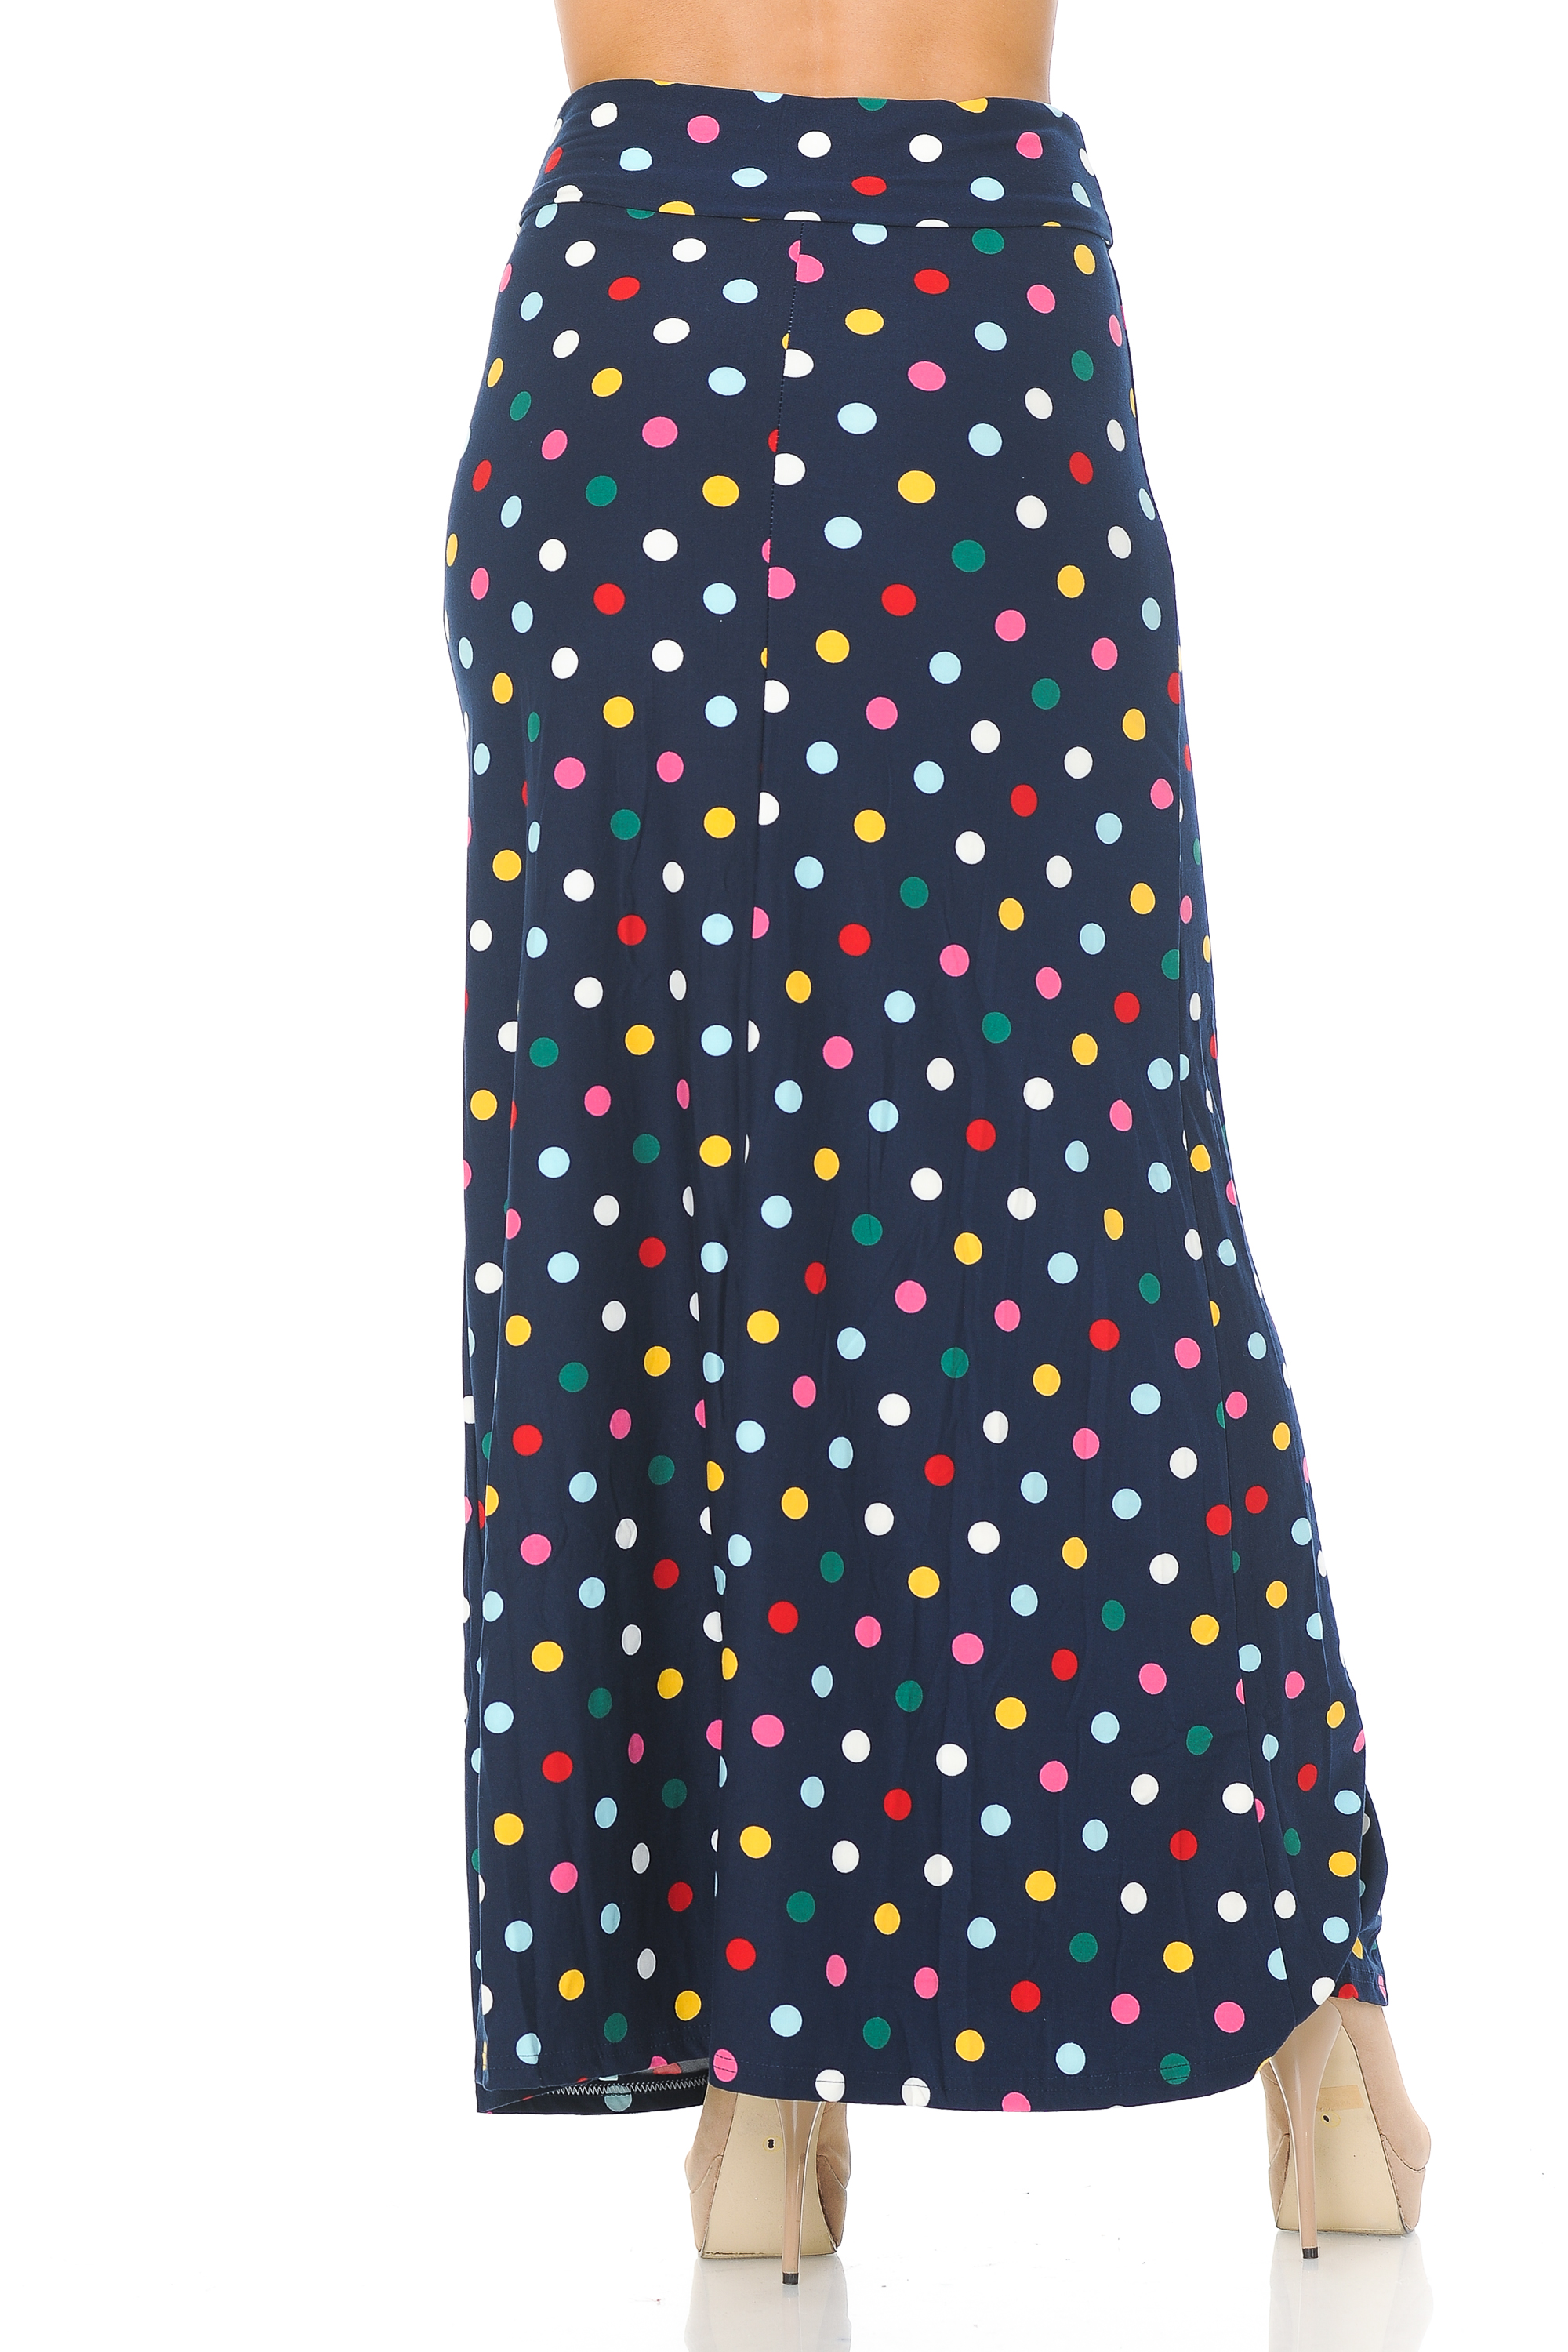 Wholesale Buttery Smooth Colorful Polka Dot Maxi Skirt